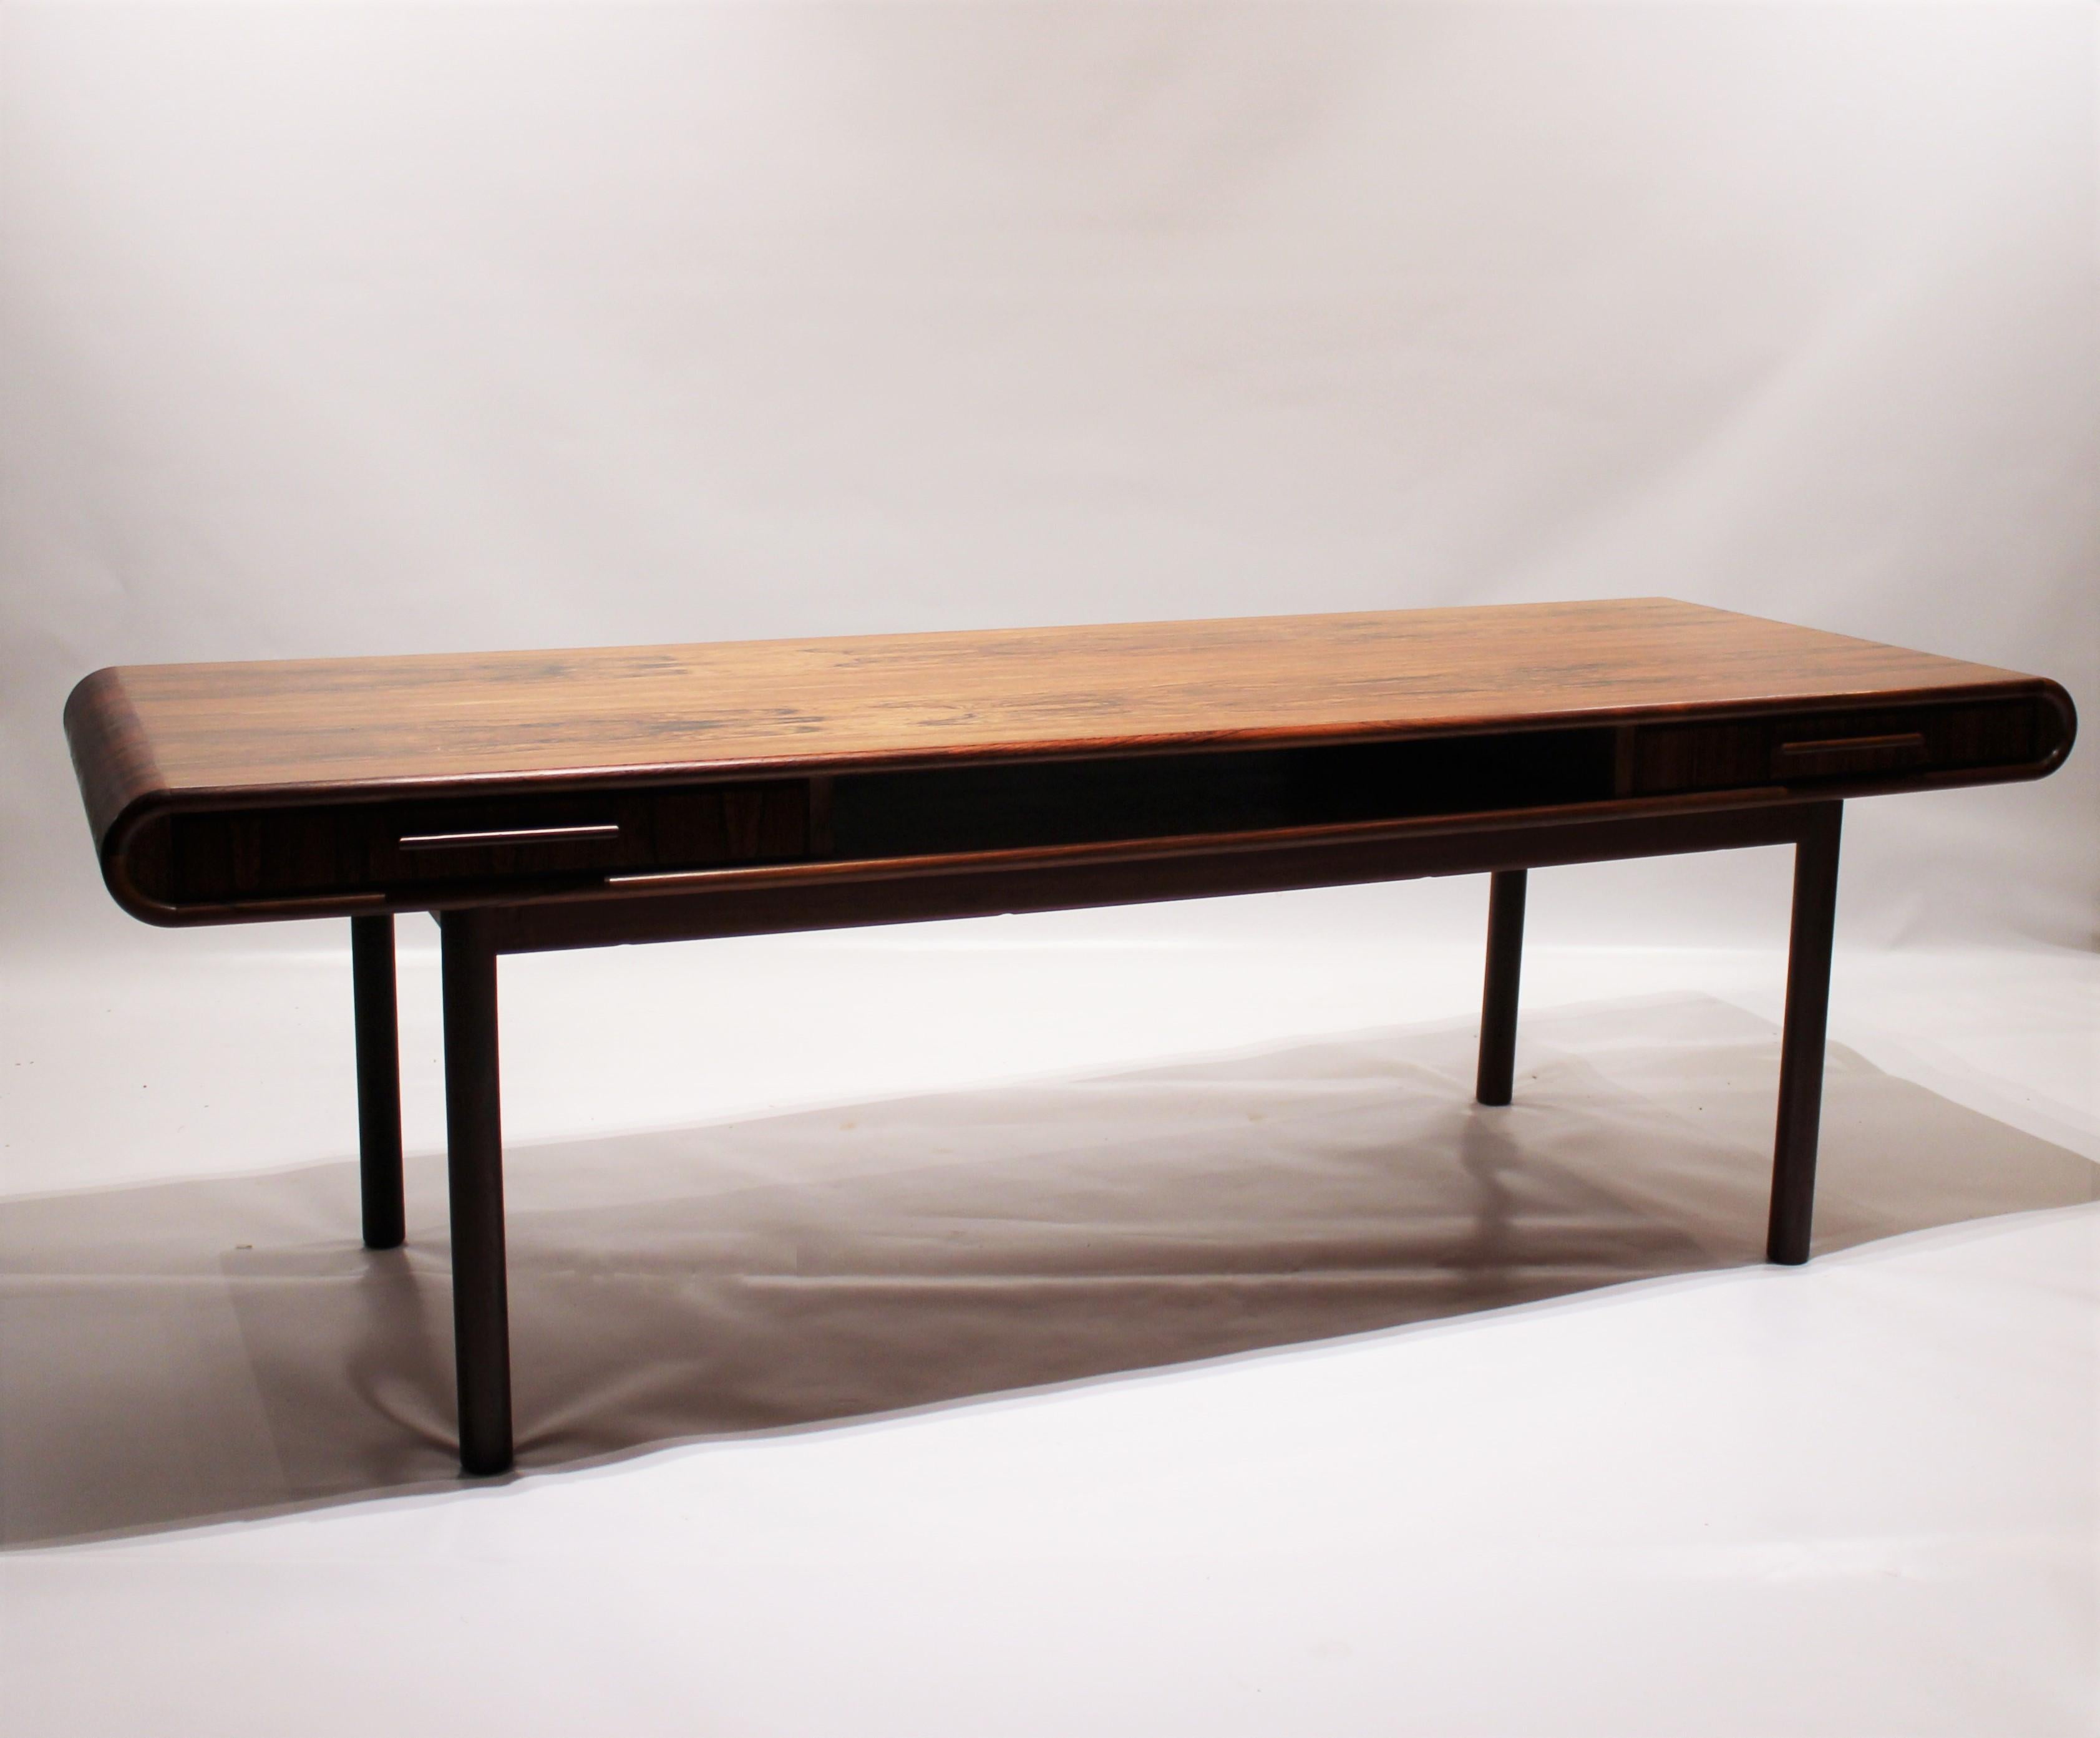 Coffee table in rosewood with curved edges of Danish design from the 1960s. The table is with an open shelf, drawers and in great vintage condition.